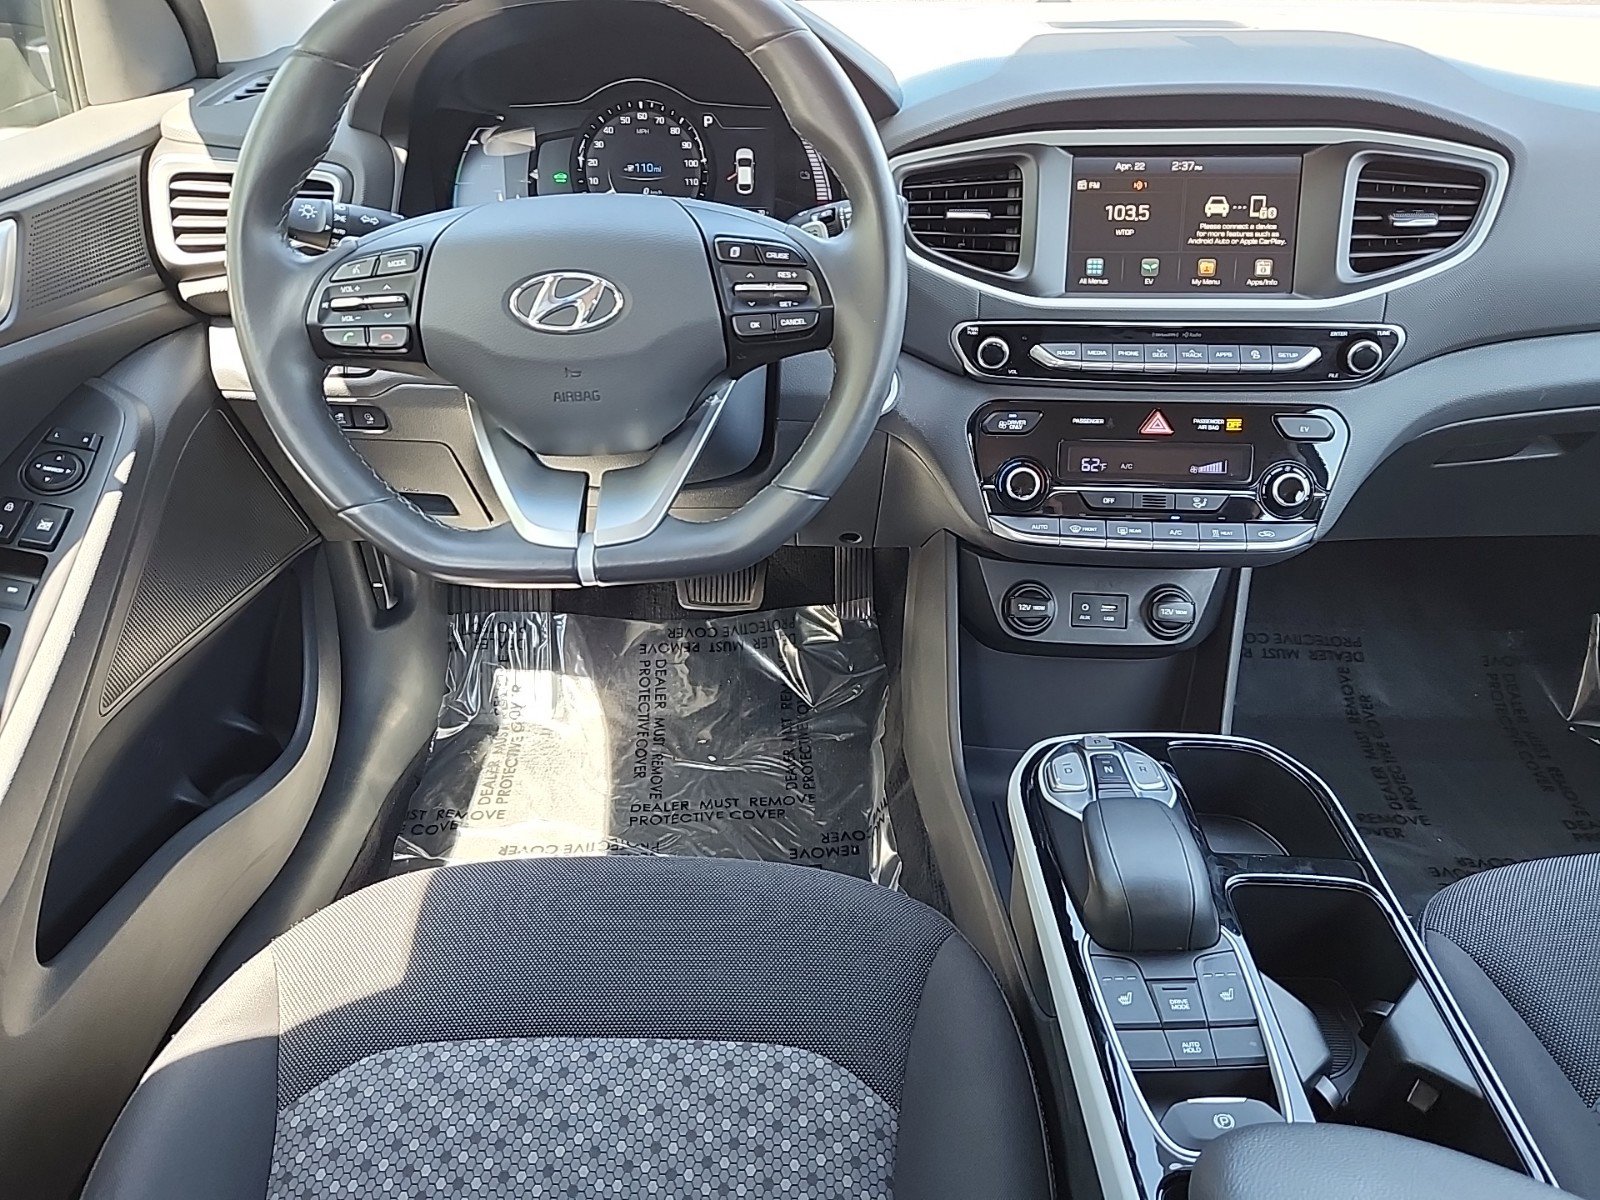 Used 2019 Hyundai Ioniq  with VIN KMHC75LH0KU050458 for sale in Dulles, VA